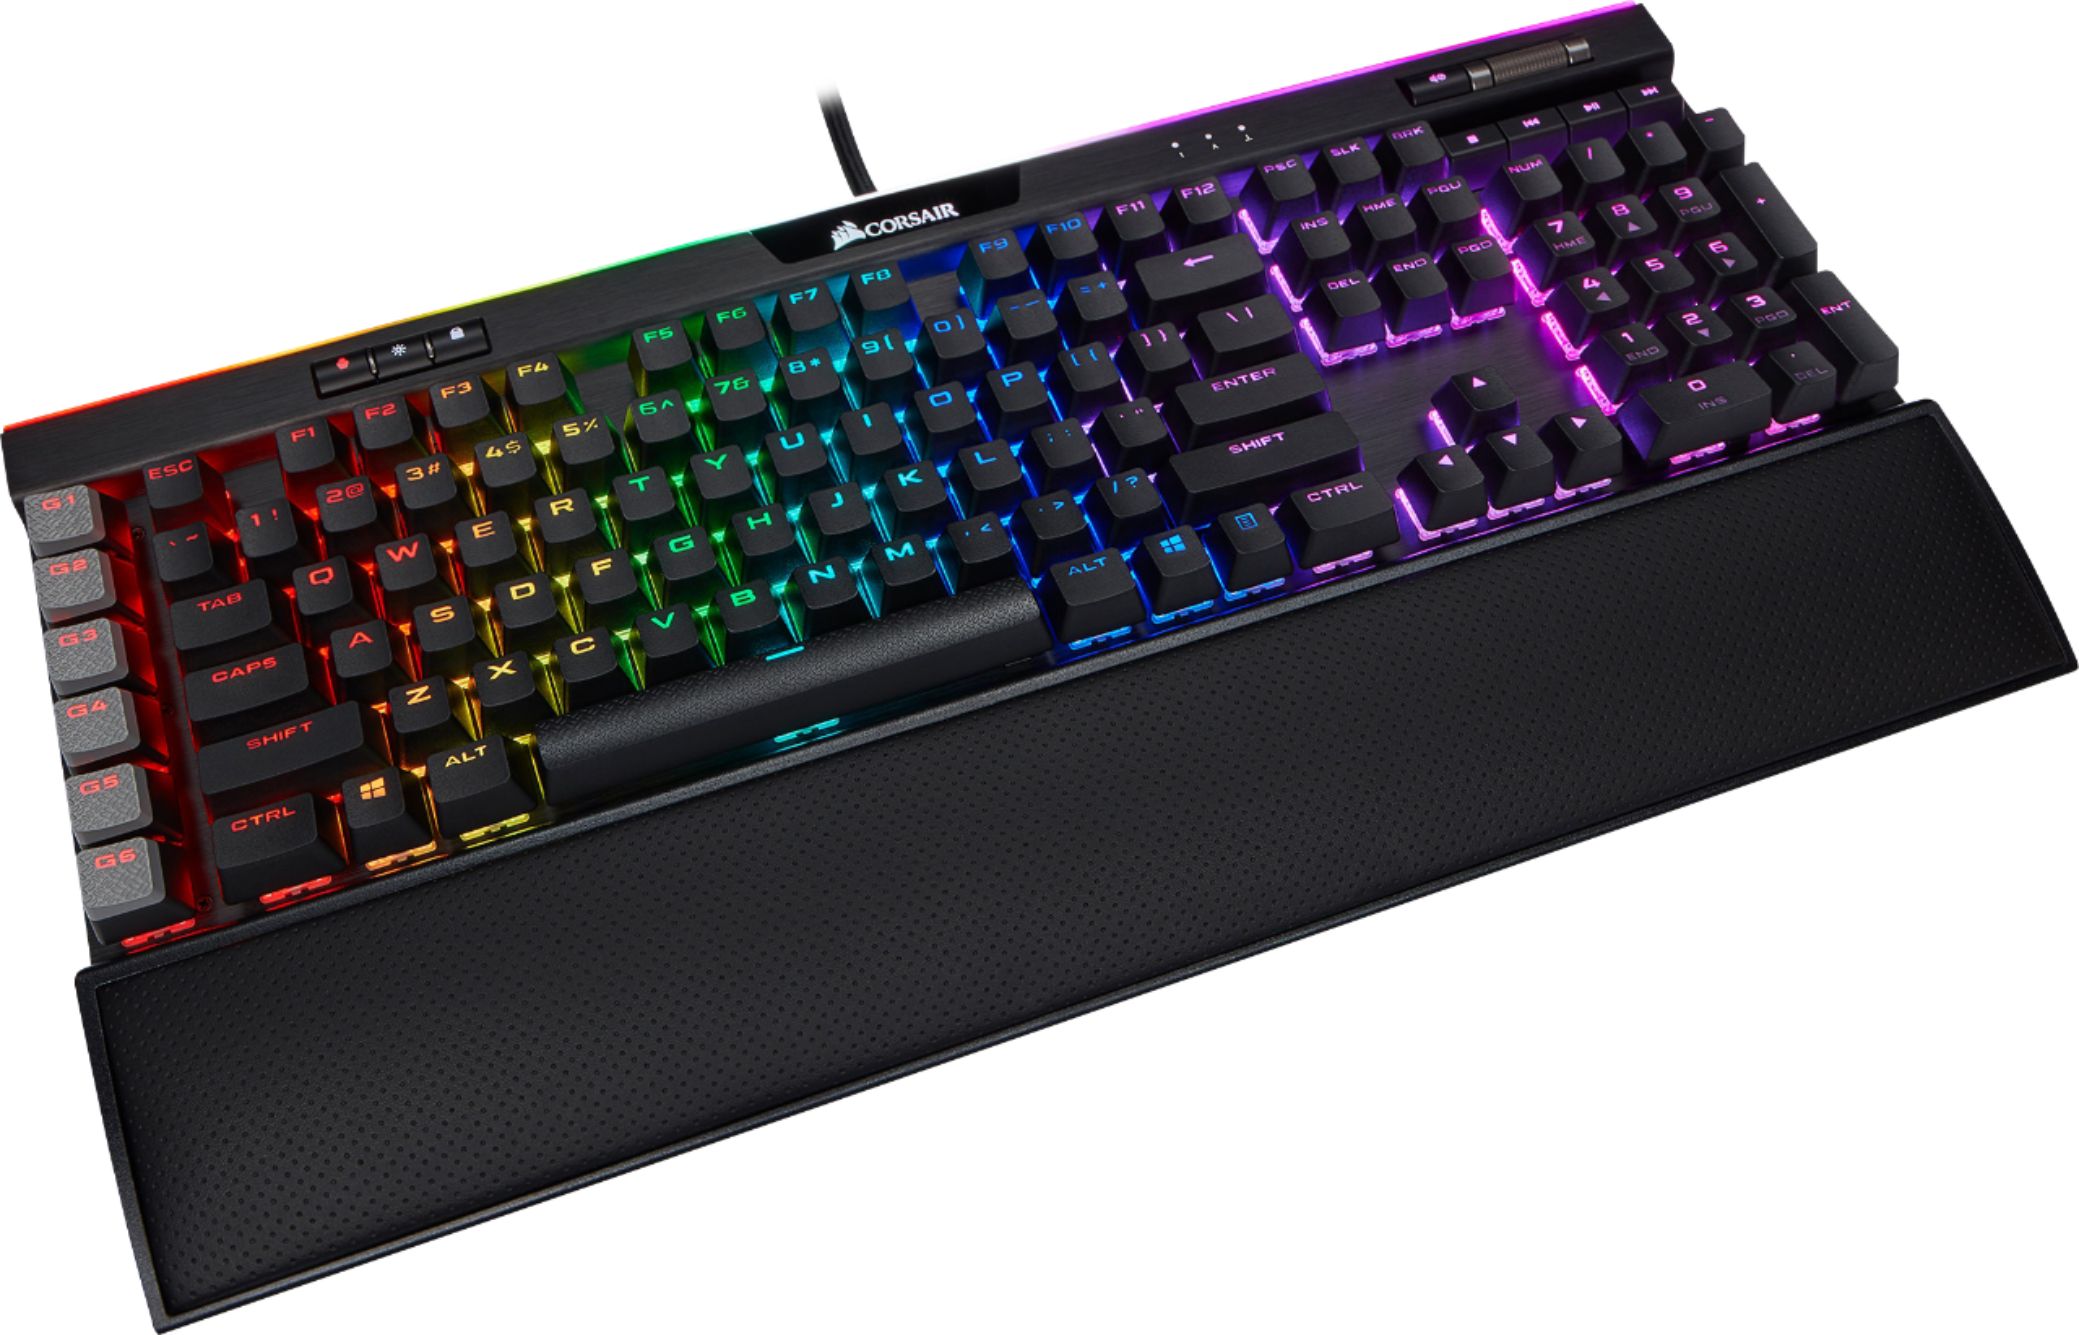 Angle View: CORSAIR - K95 RGB PLATINUM XT Full-size Wired Mechanical Cherry MX Speed Linear Switch Gaming Keyboard - Black